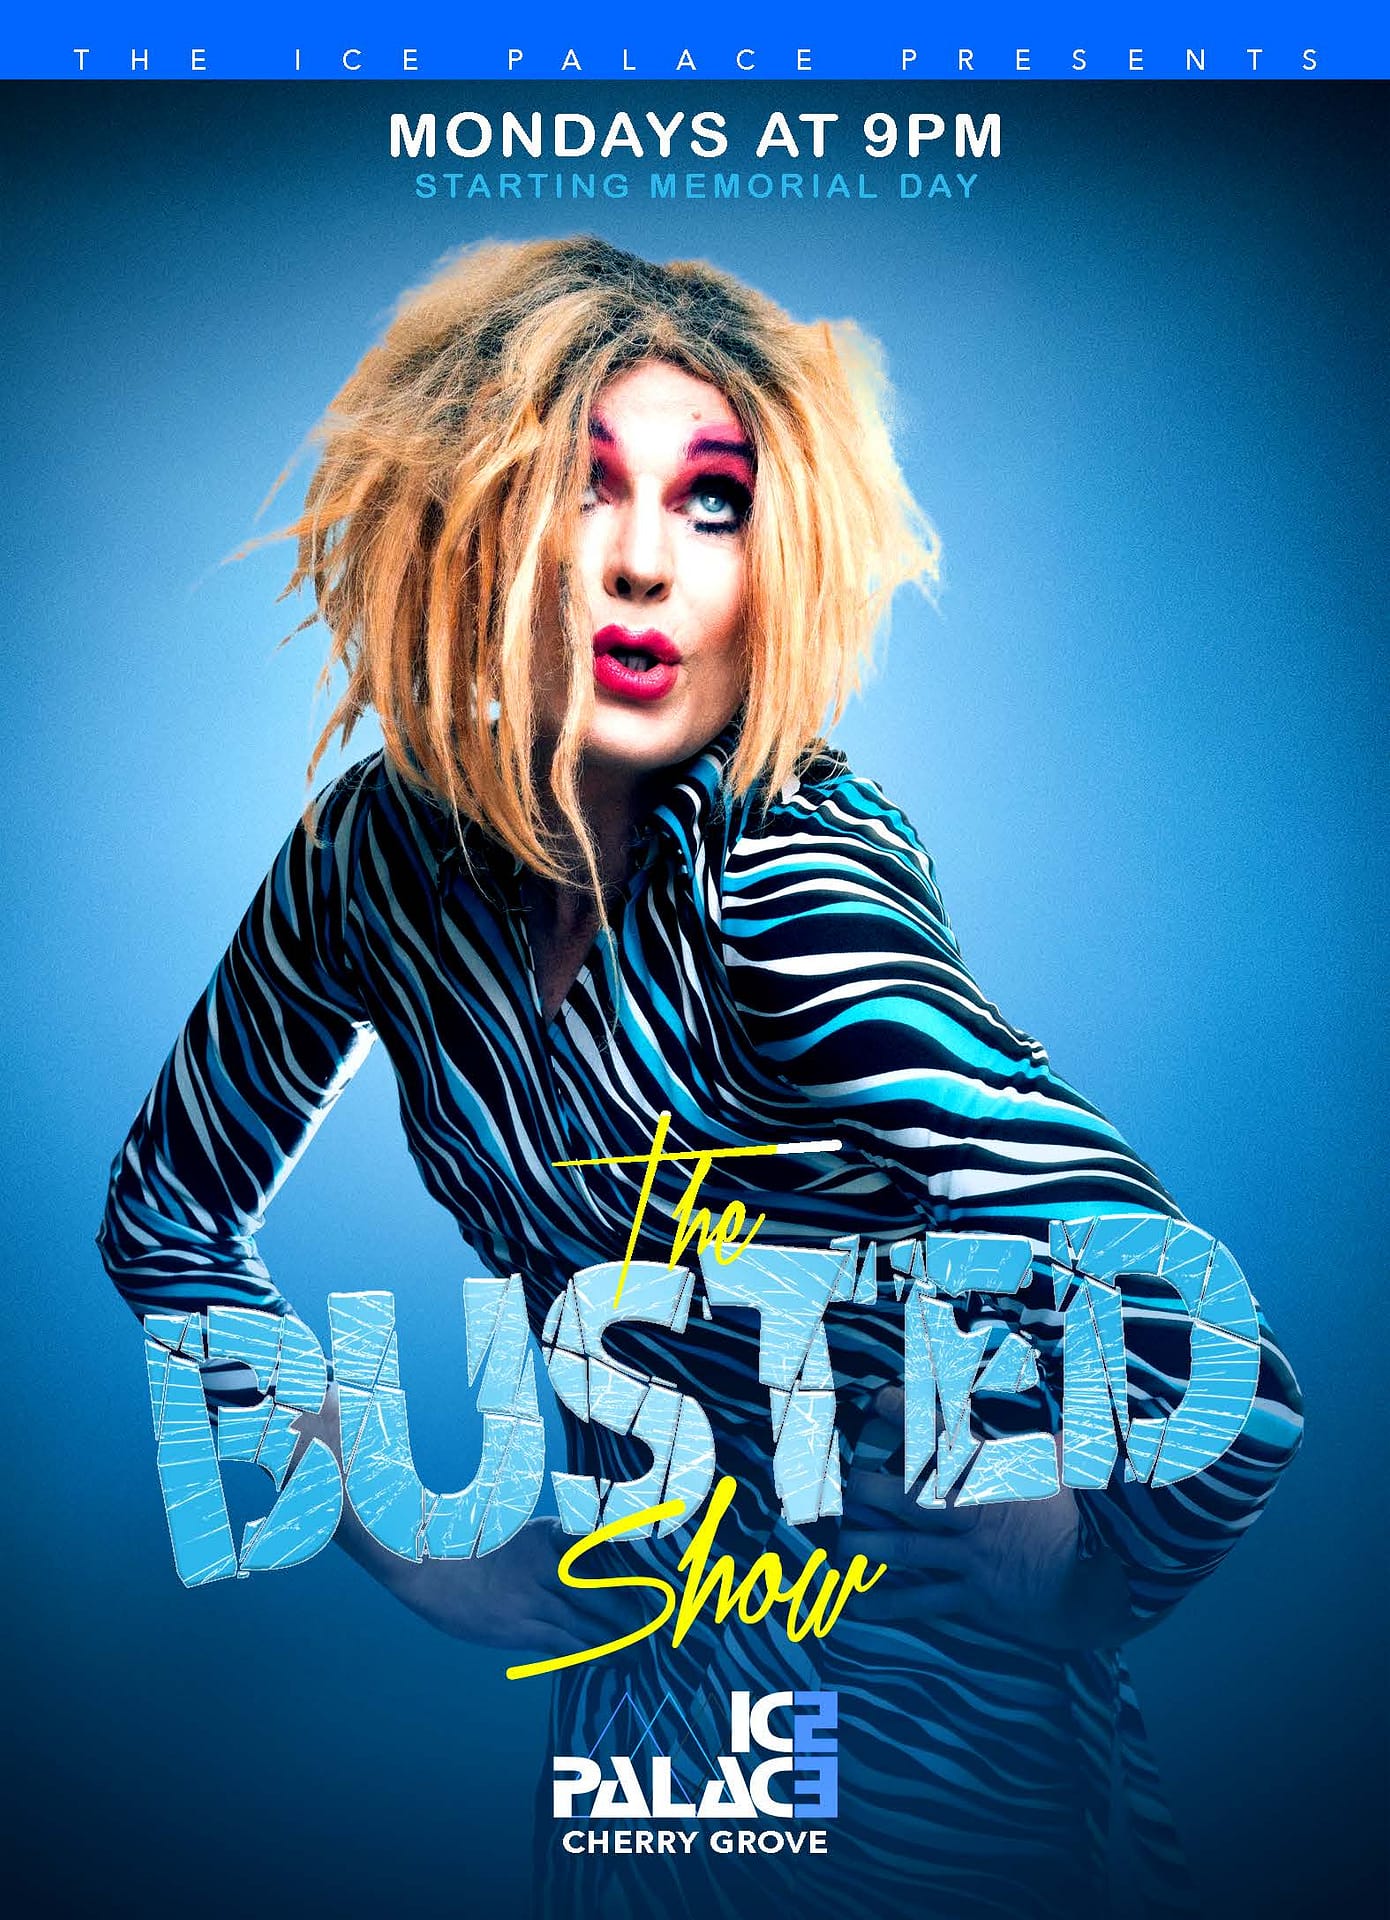 The Busted Show